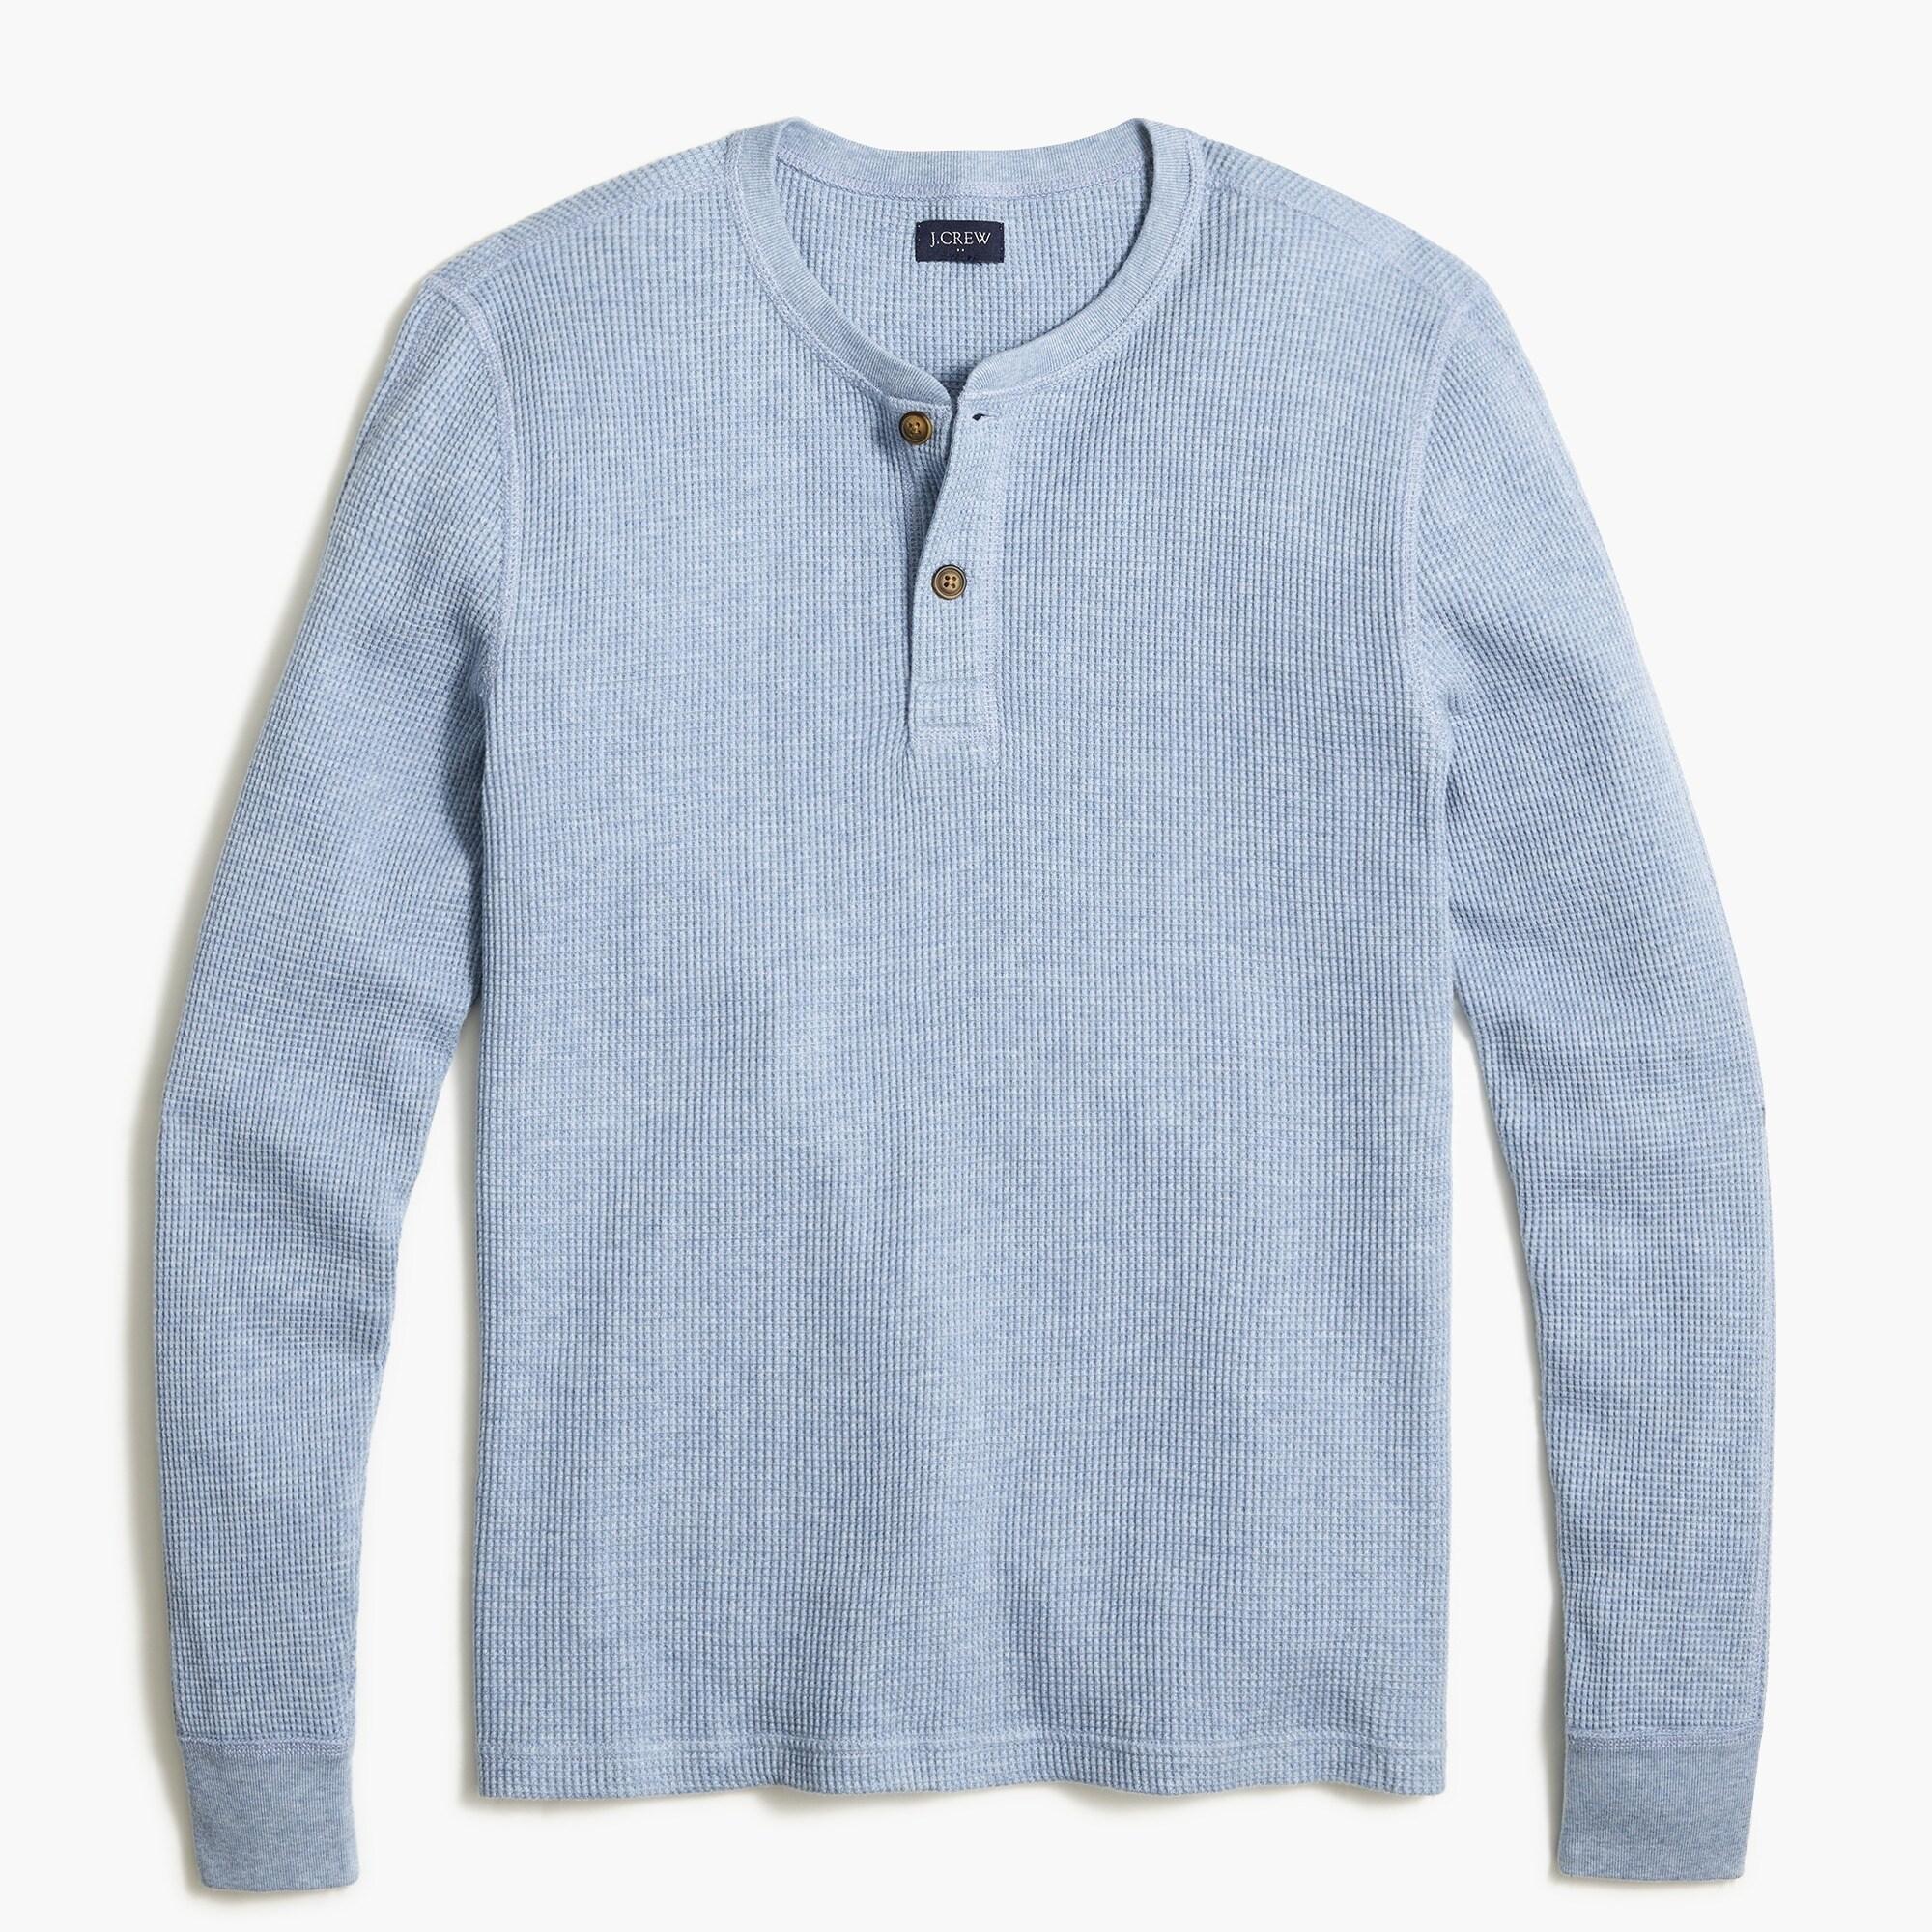 J.Crew Cotton Long-sleeve Thermal Henley in Blue for Men - Lyst